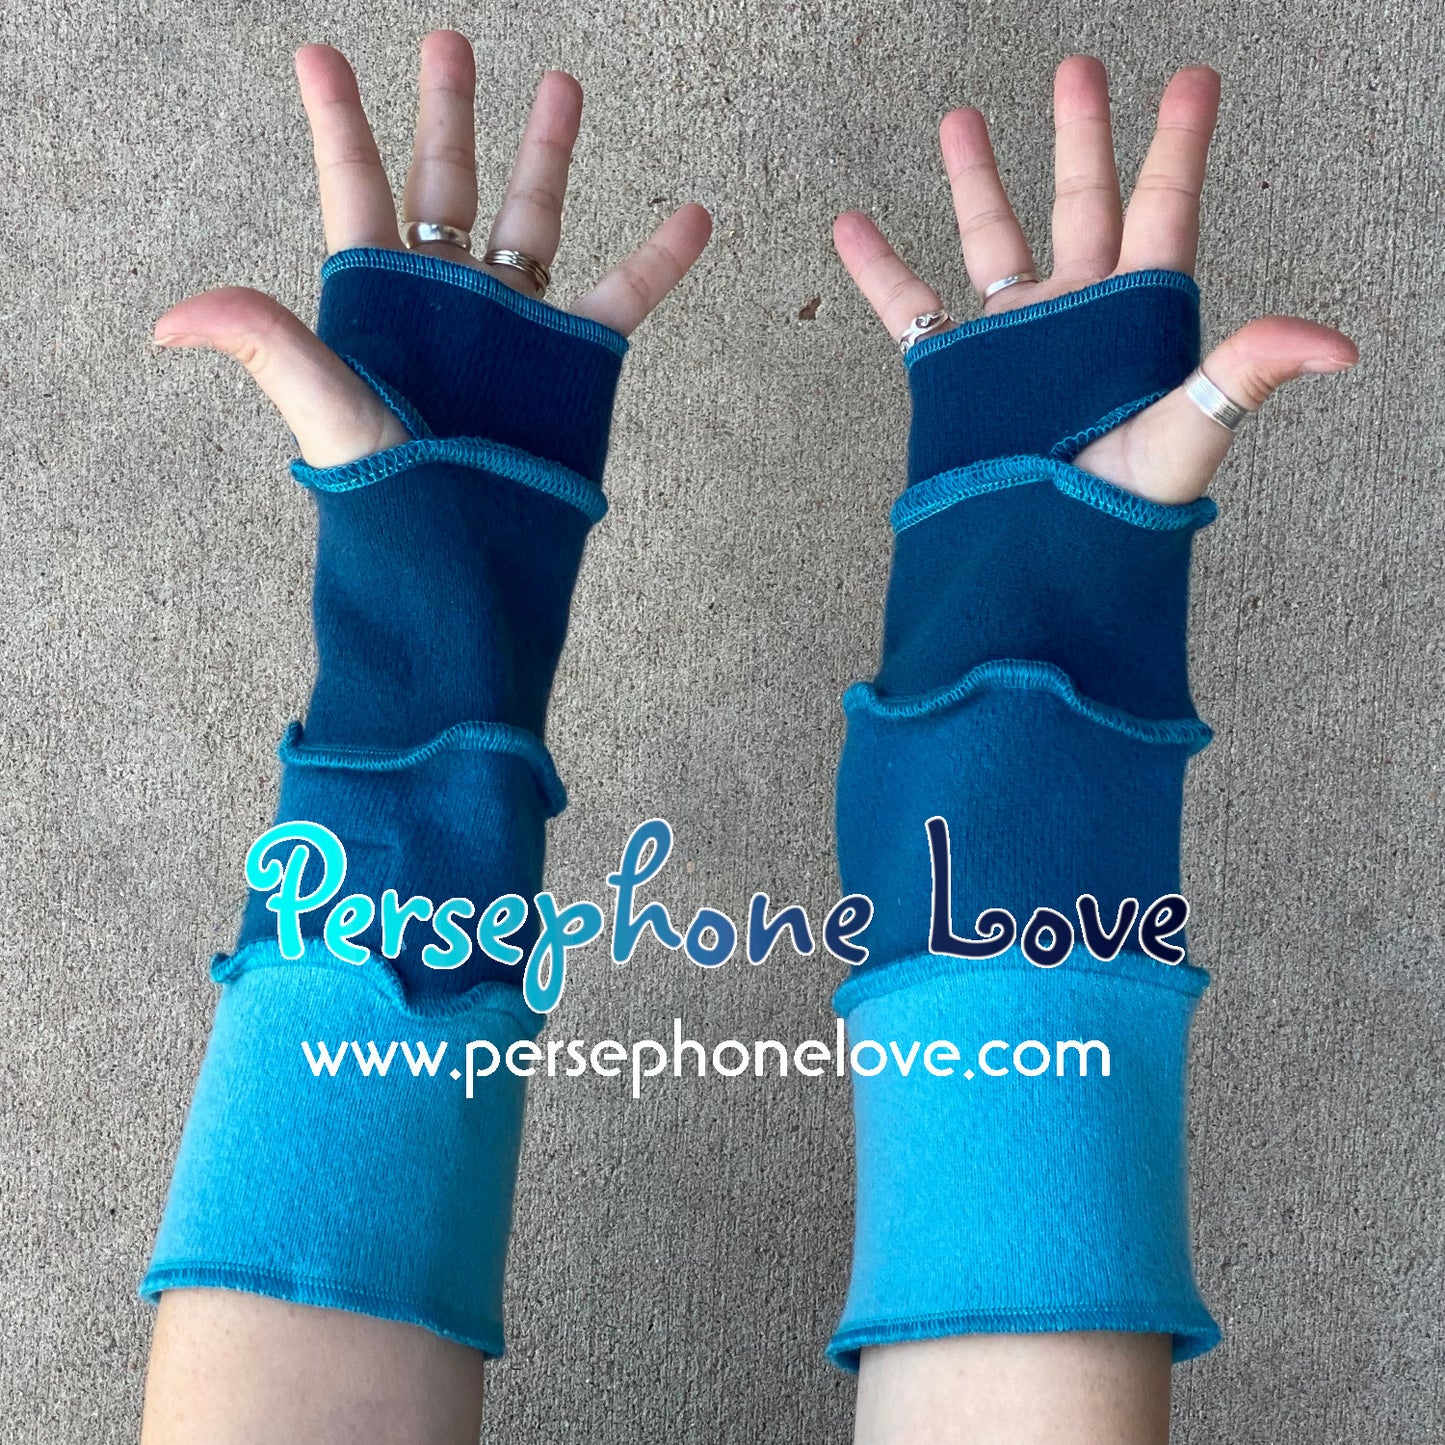 Katwise inspired needle-felted teal/turquoise 100% cashmere upcycled sweater arm warmers -1455